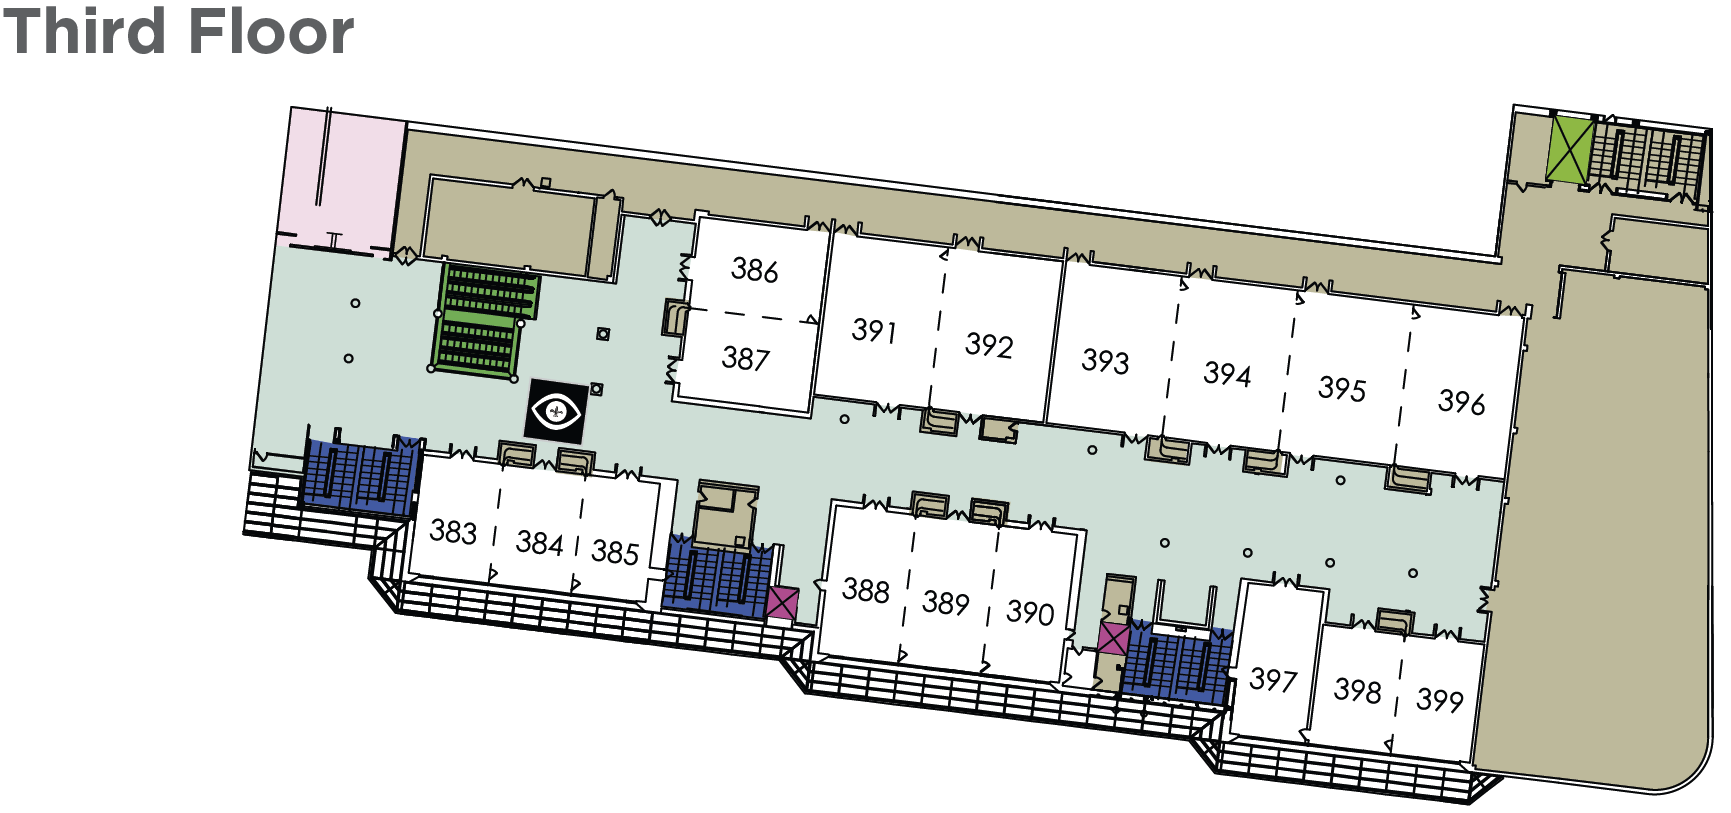 Third Floor Map of Morial Convention Center